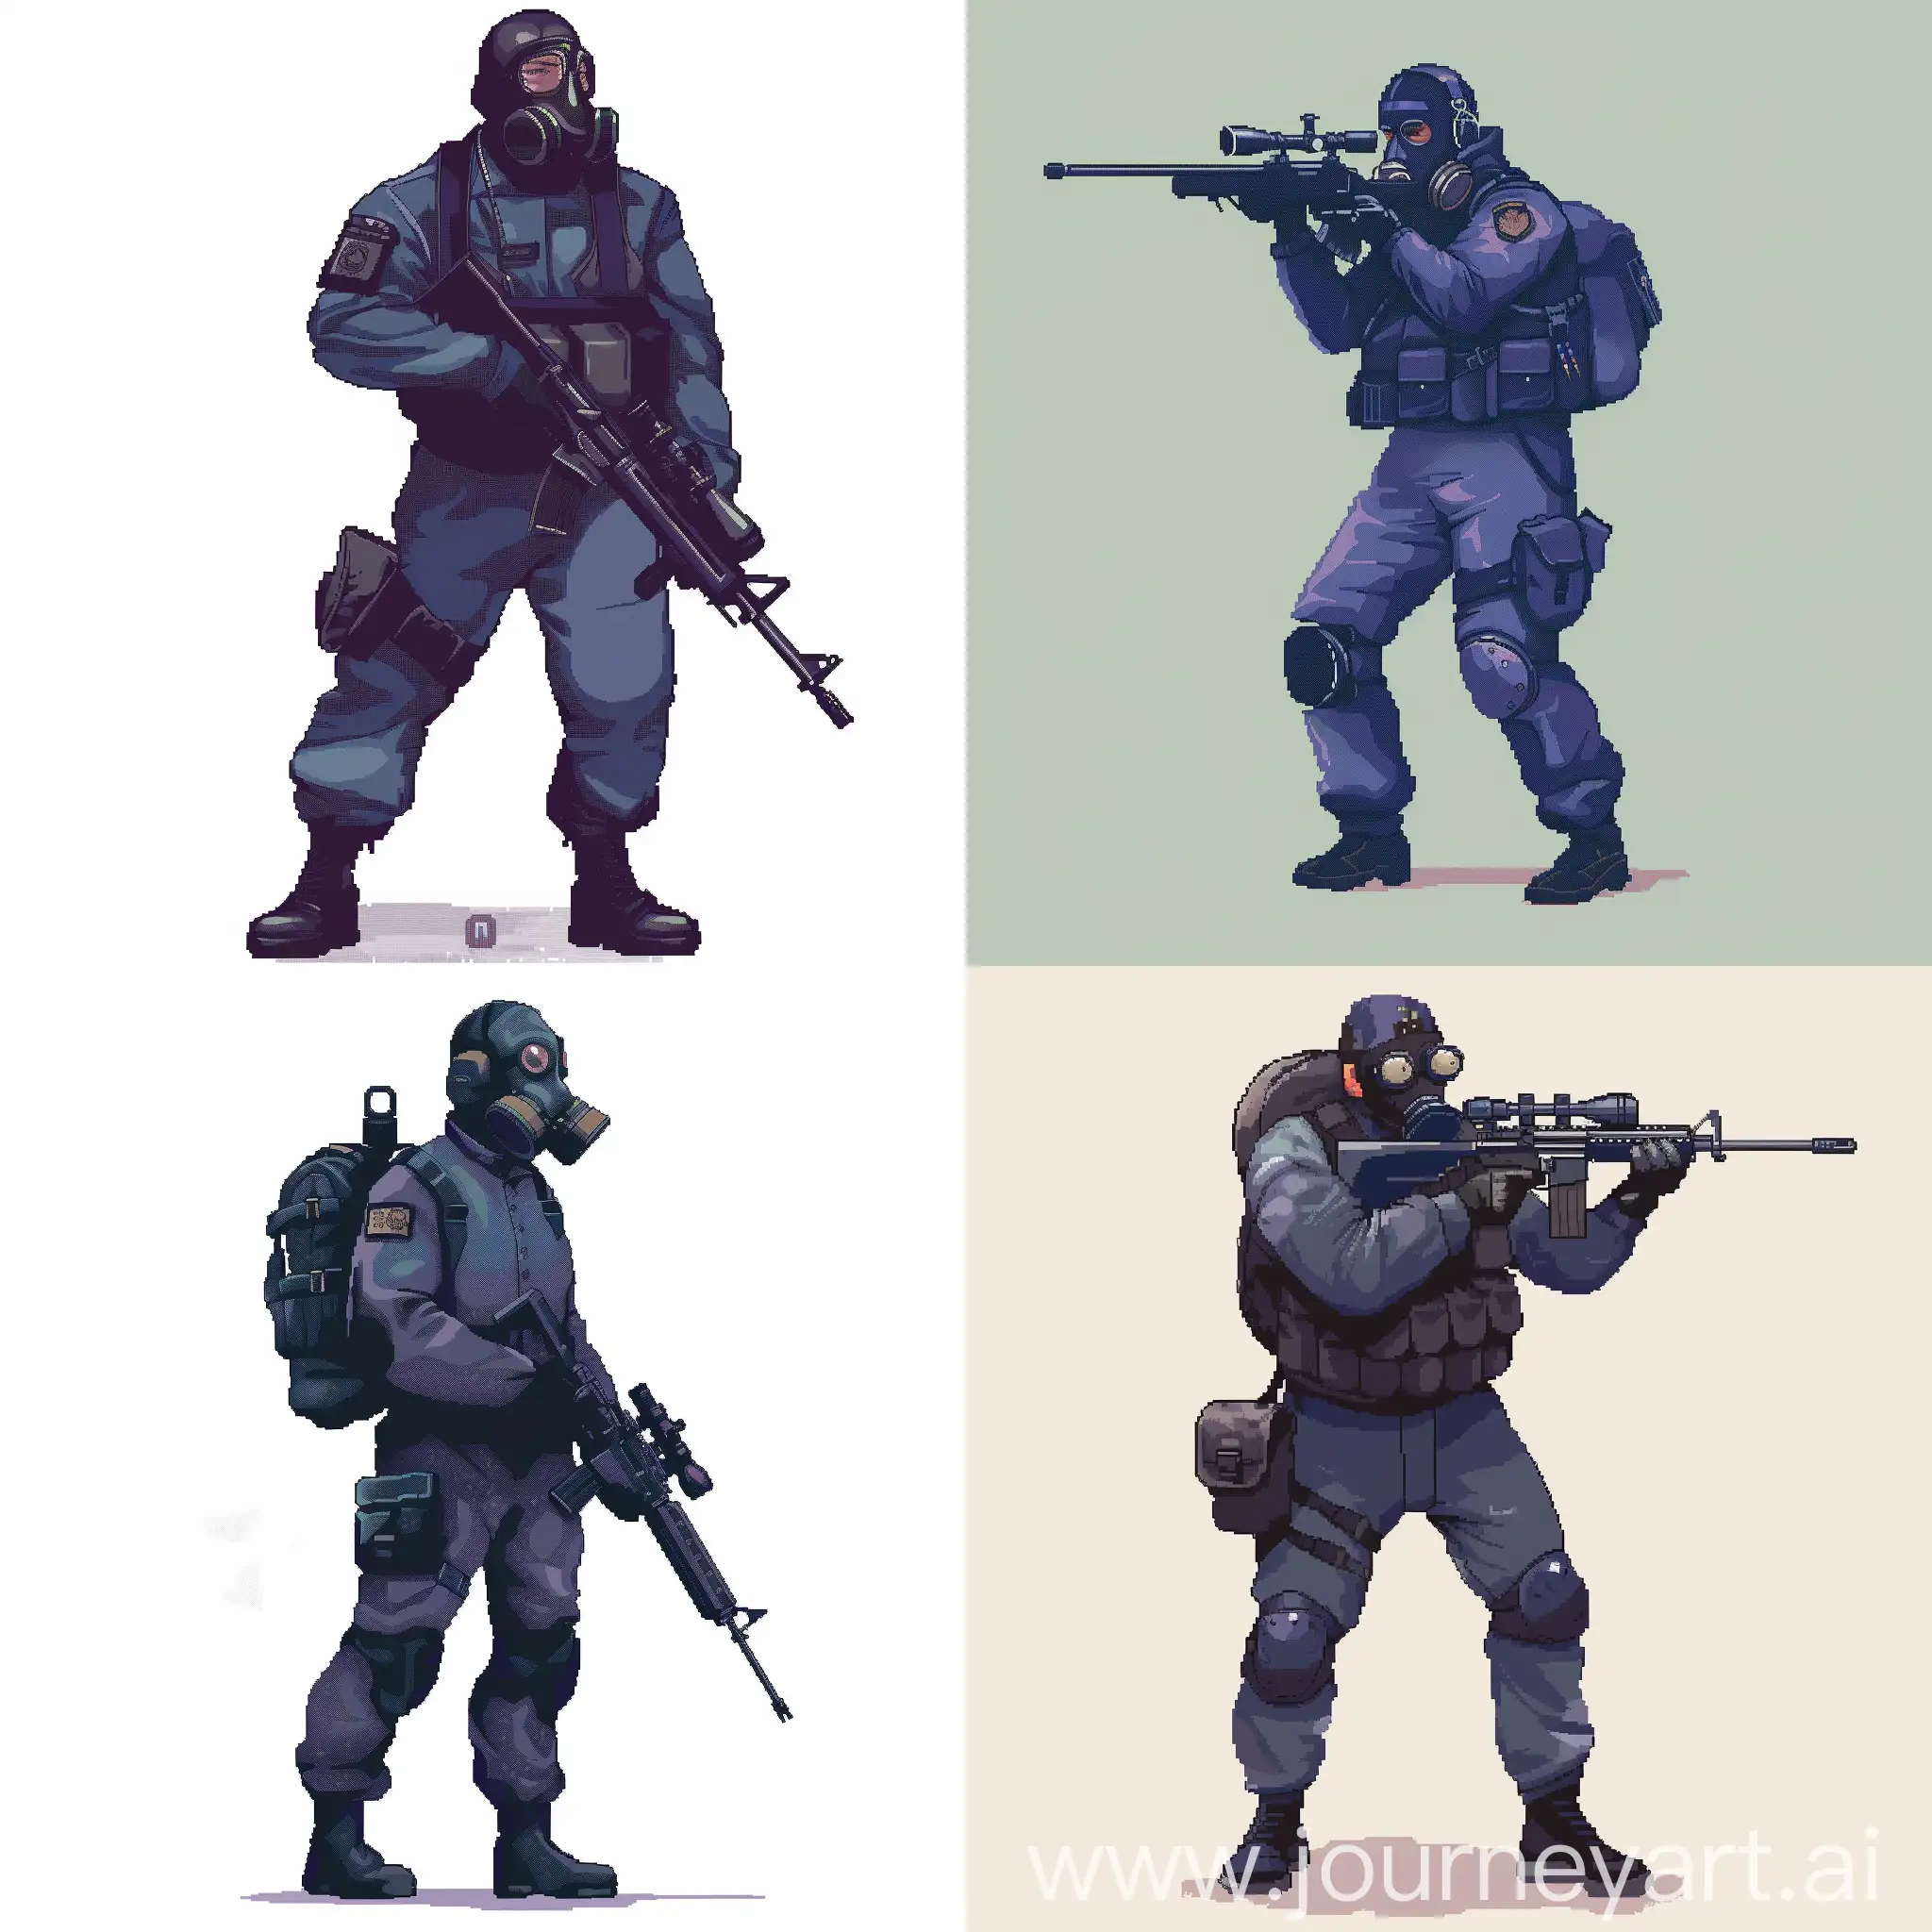 Pixel art, character, SAS operator, dark purple military jumpsuit, gasmask on his face, small military backpack, military unloading on his body, sniper rifle in his hands.